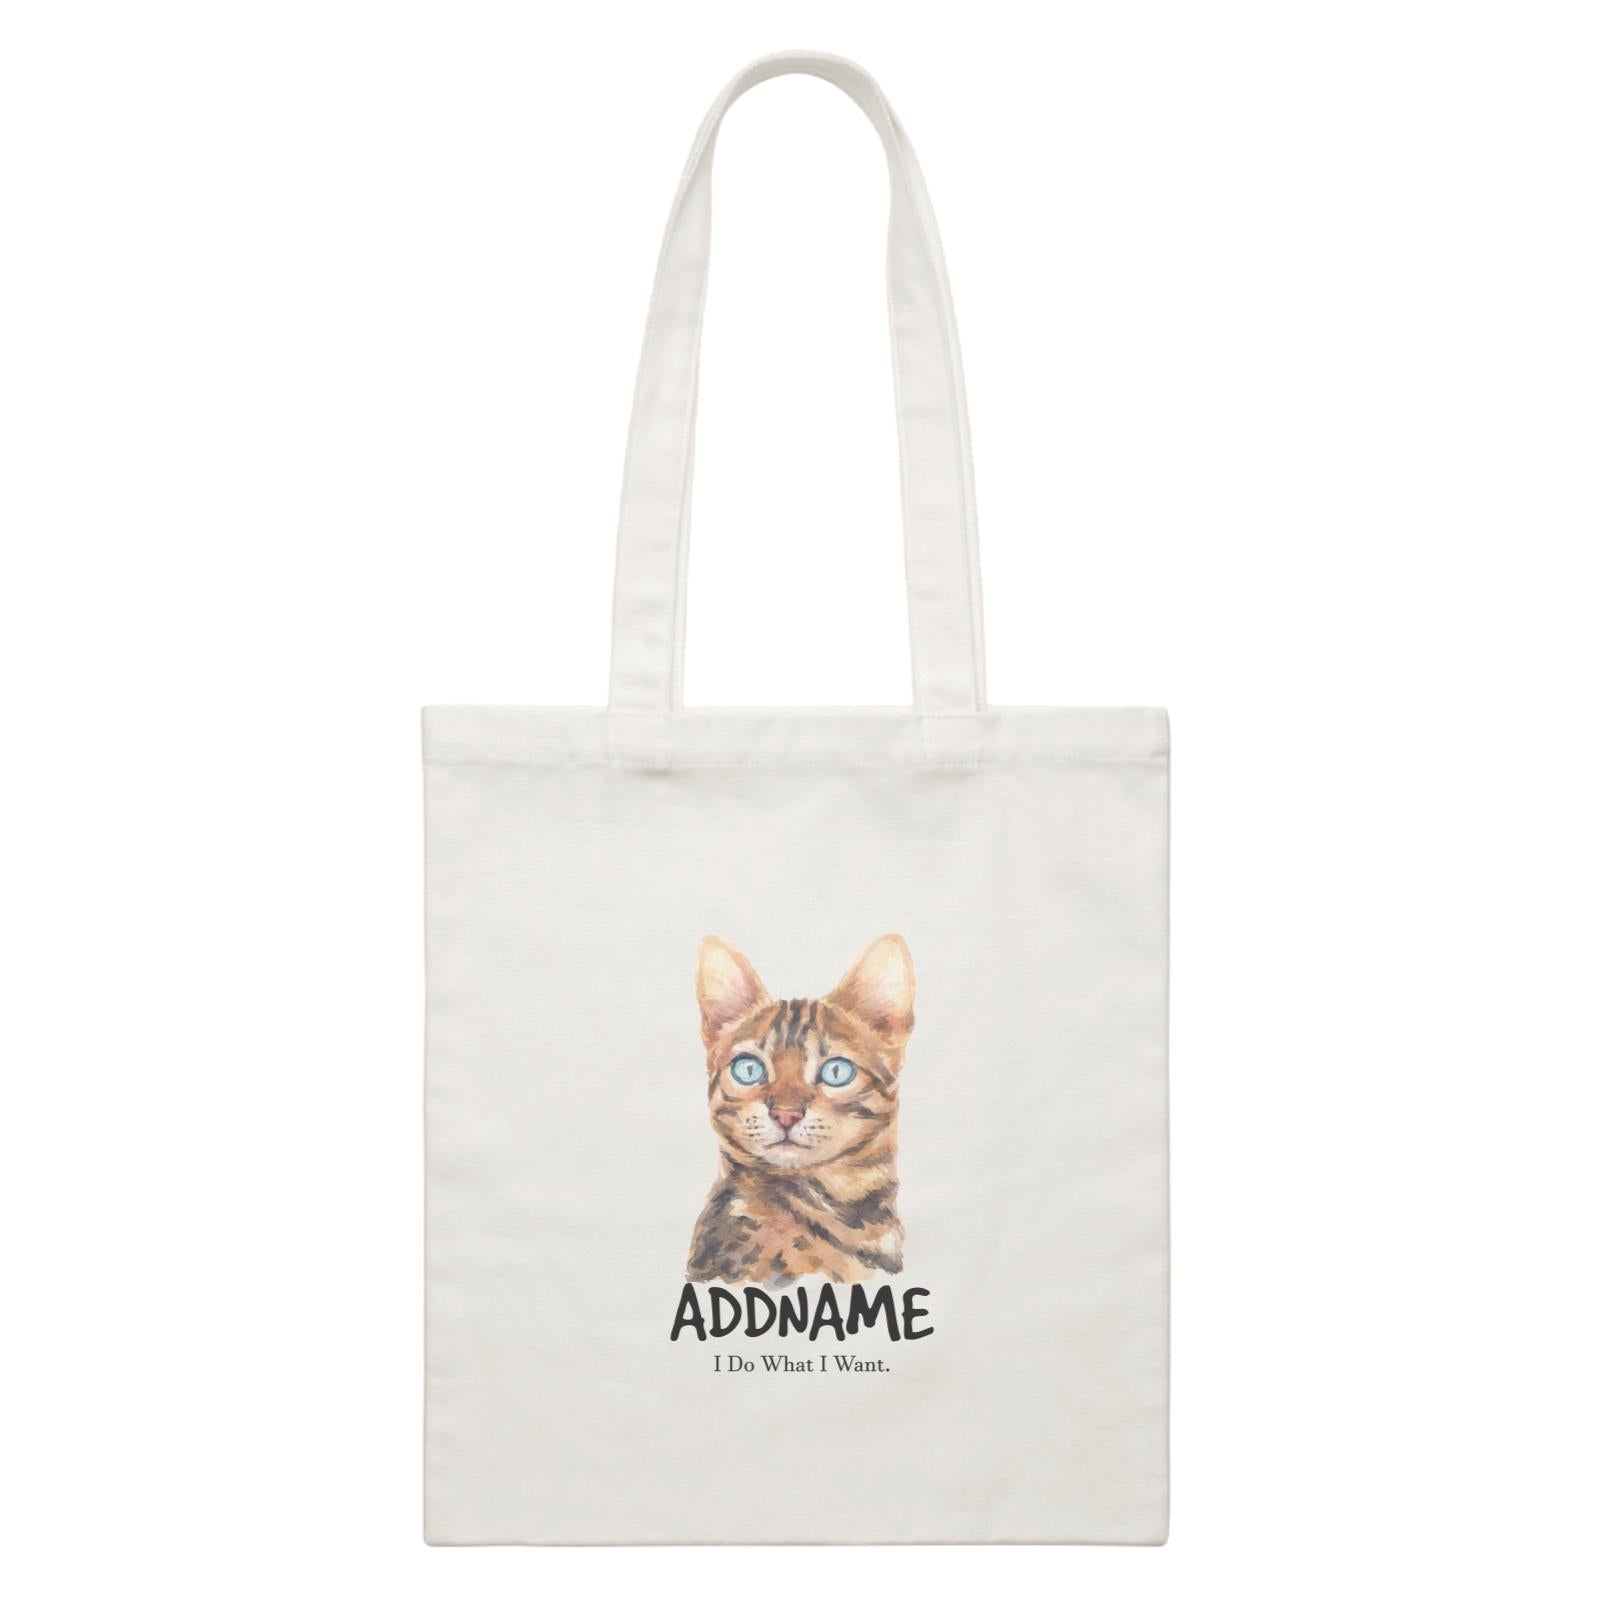 Watercolor Cat Bengal Cat I Do What I Want Addname White Canvas Bag